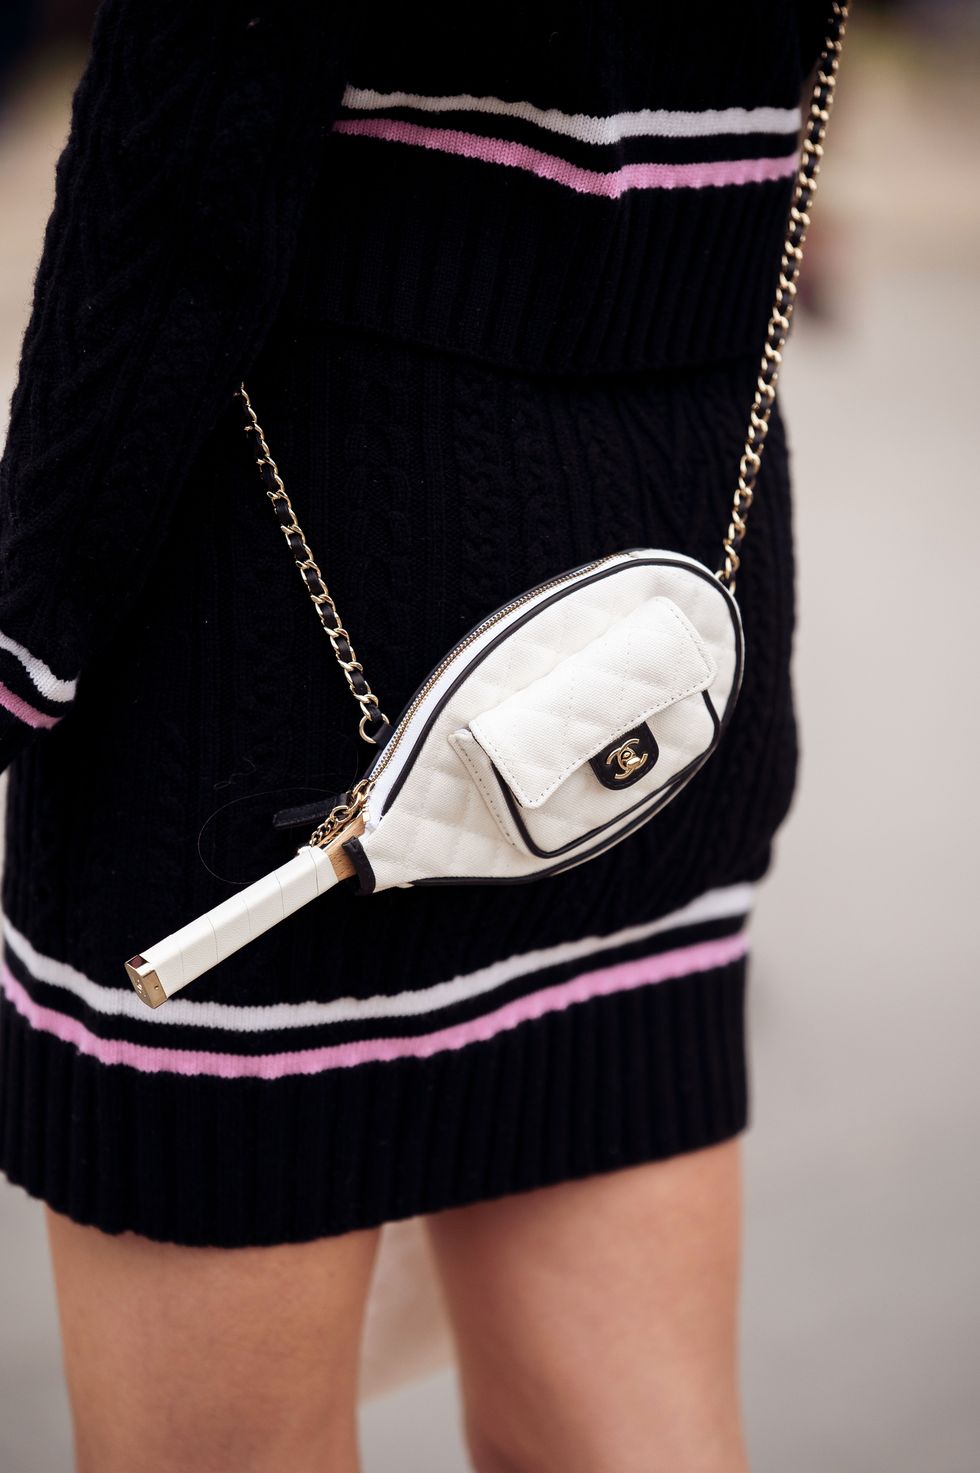 6 Summer Bag Trends To Have On Your Radar for 2023